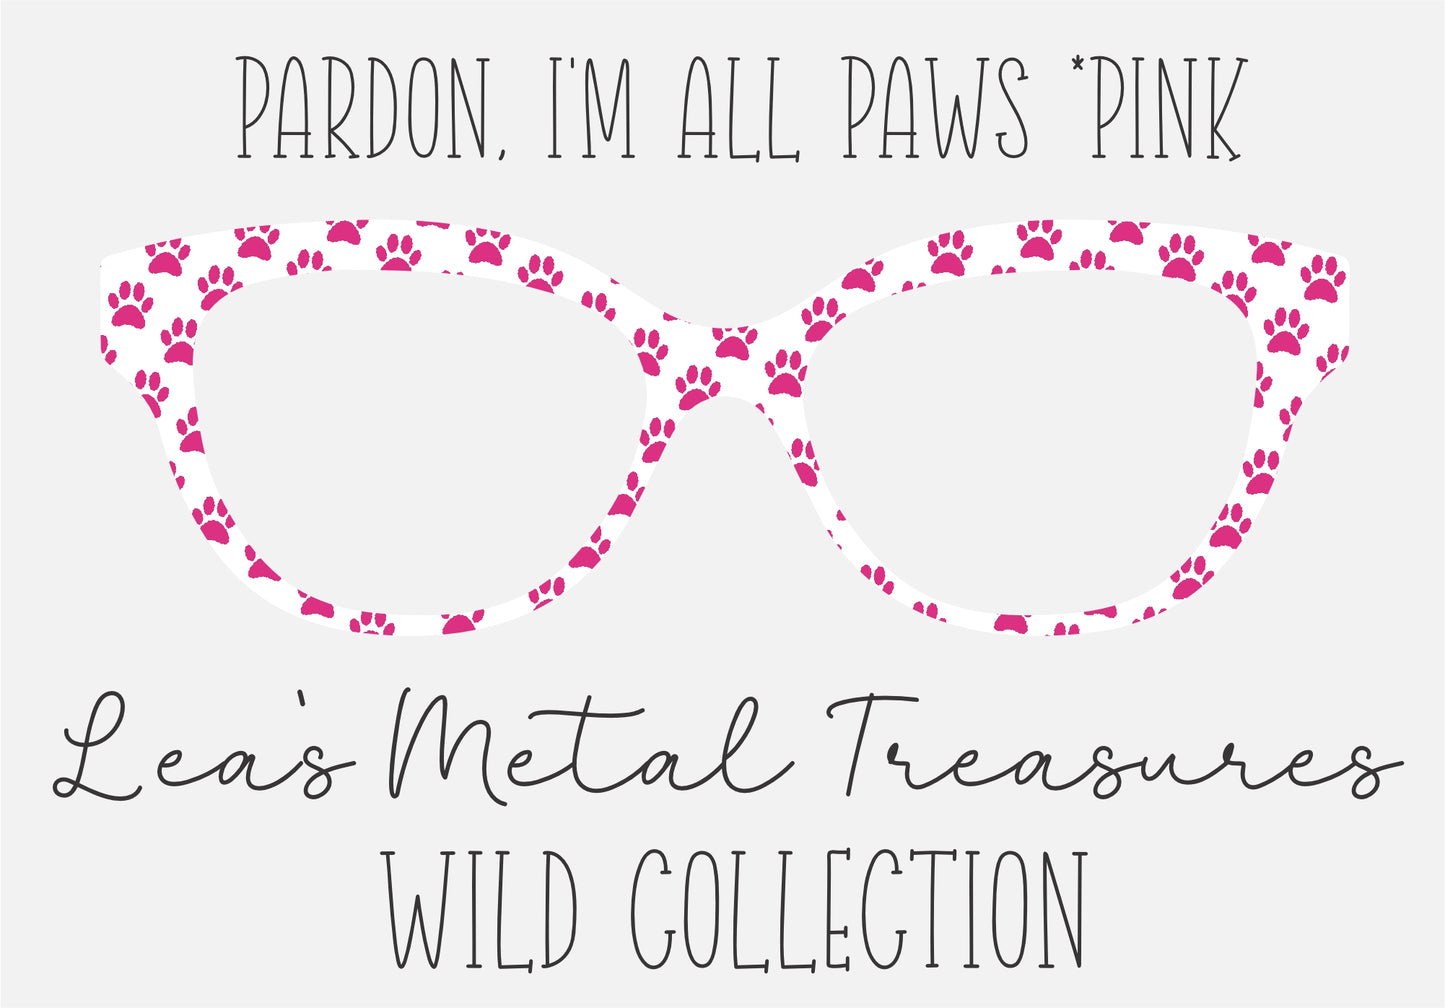 PARDON, I'M ALL PAWS * PINK Eyewear Frame Toppers COMES WITH MAGNETS